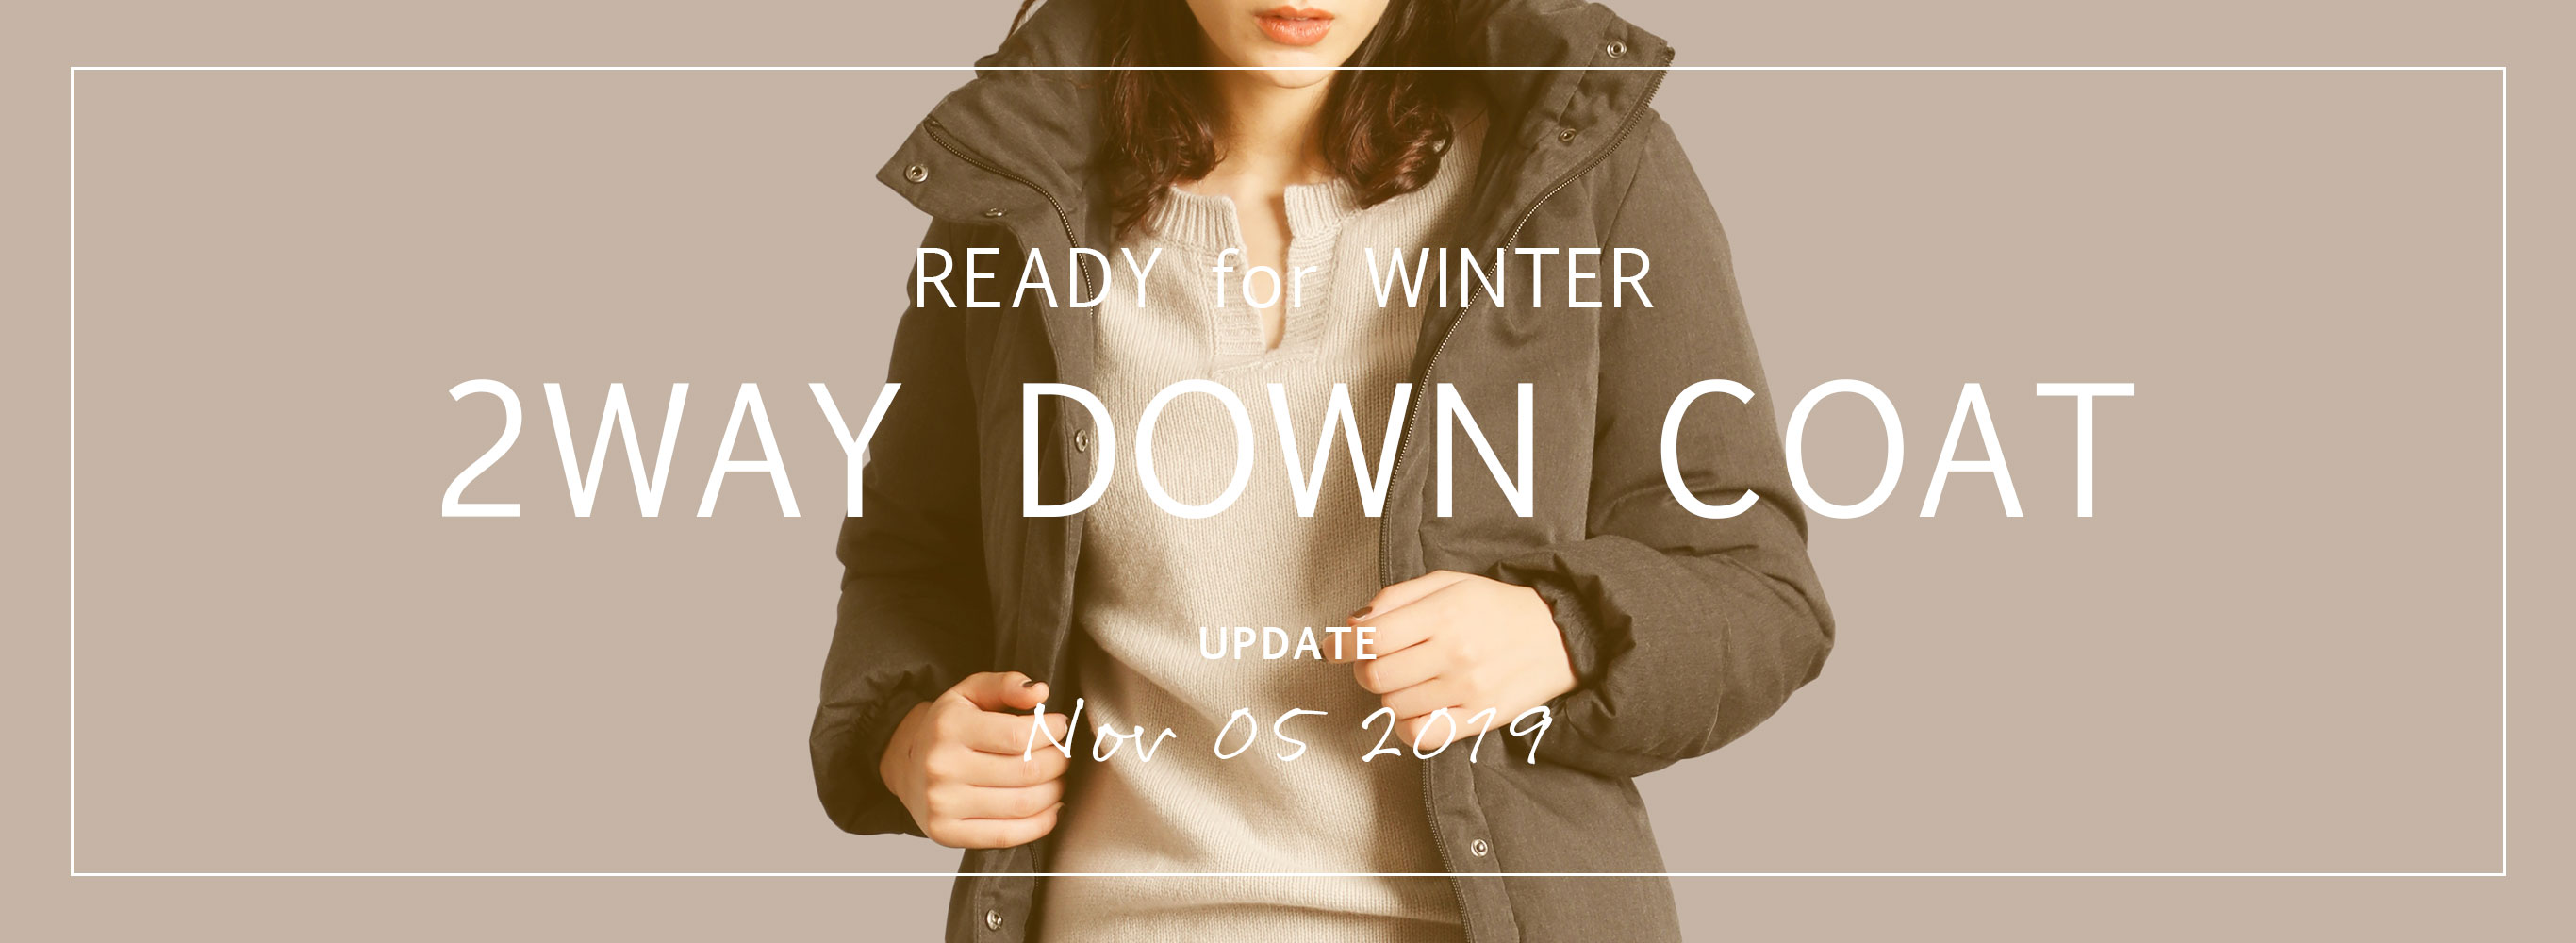 READY for WINTER@2WAY DOWN COAT